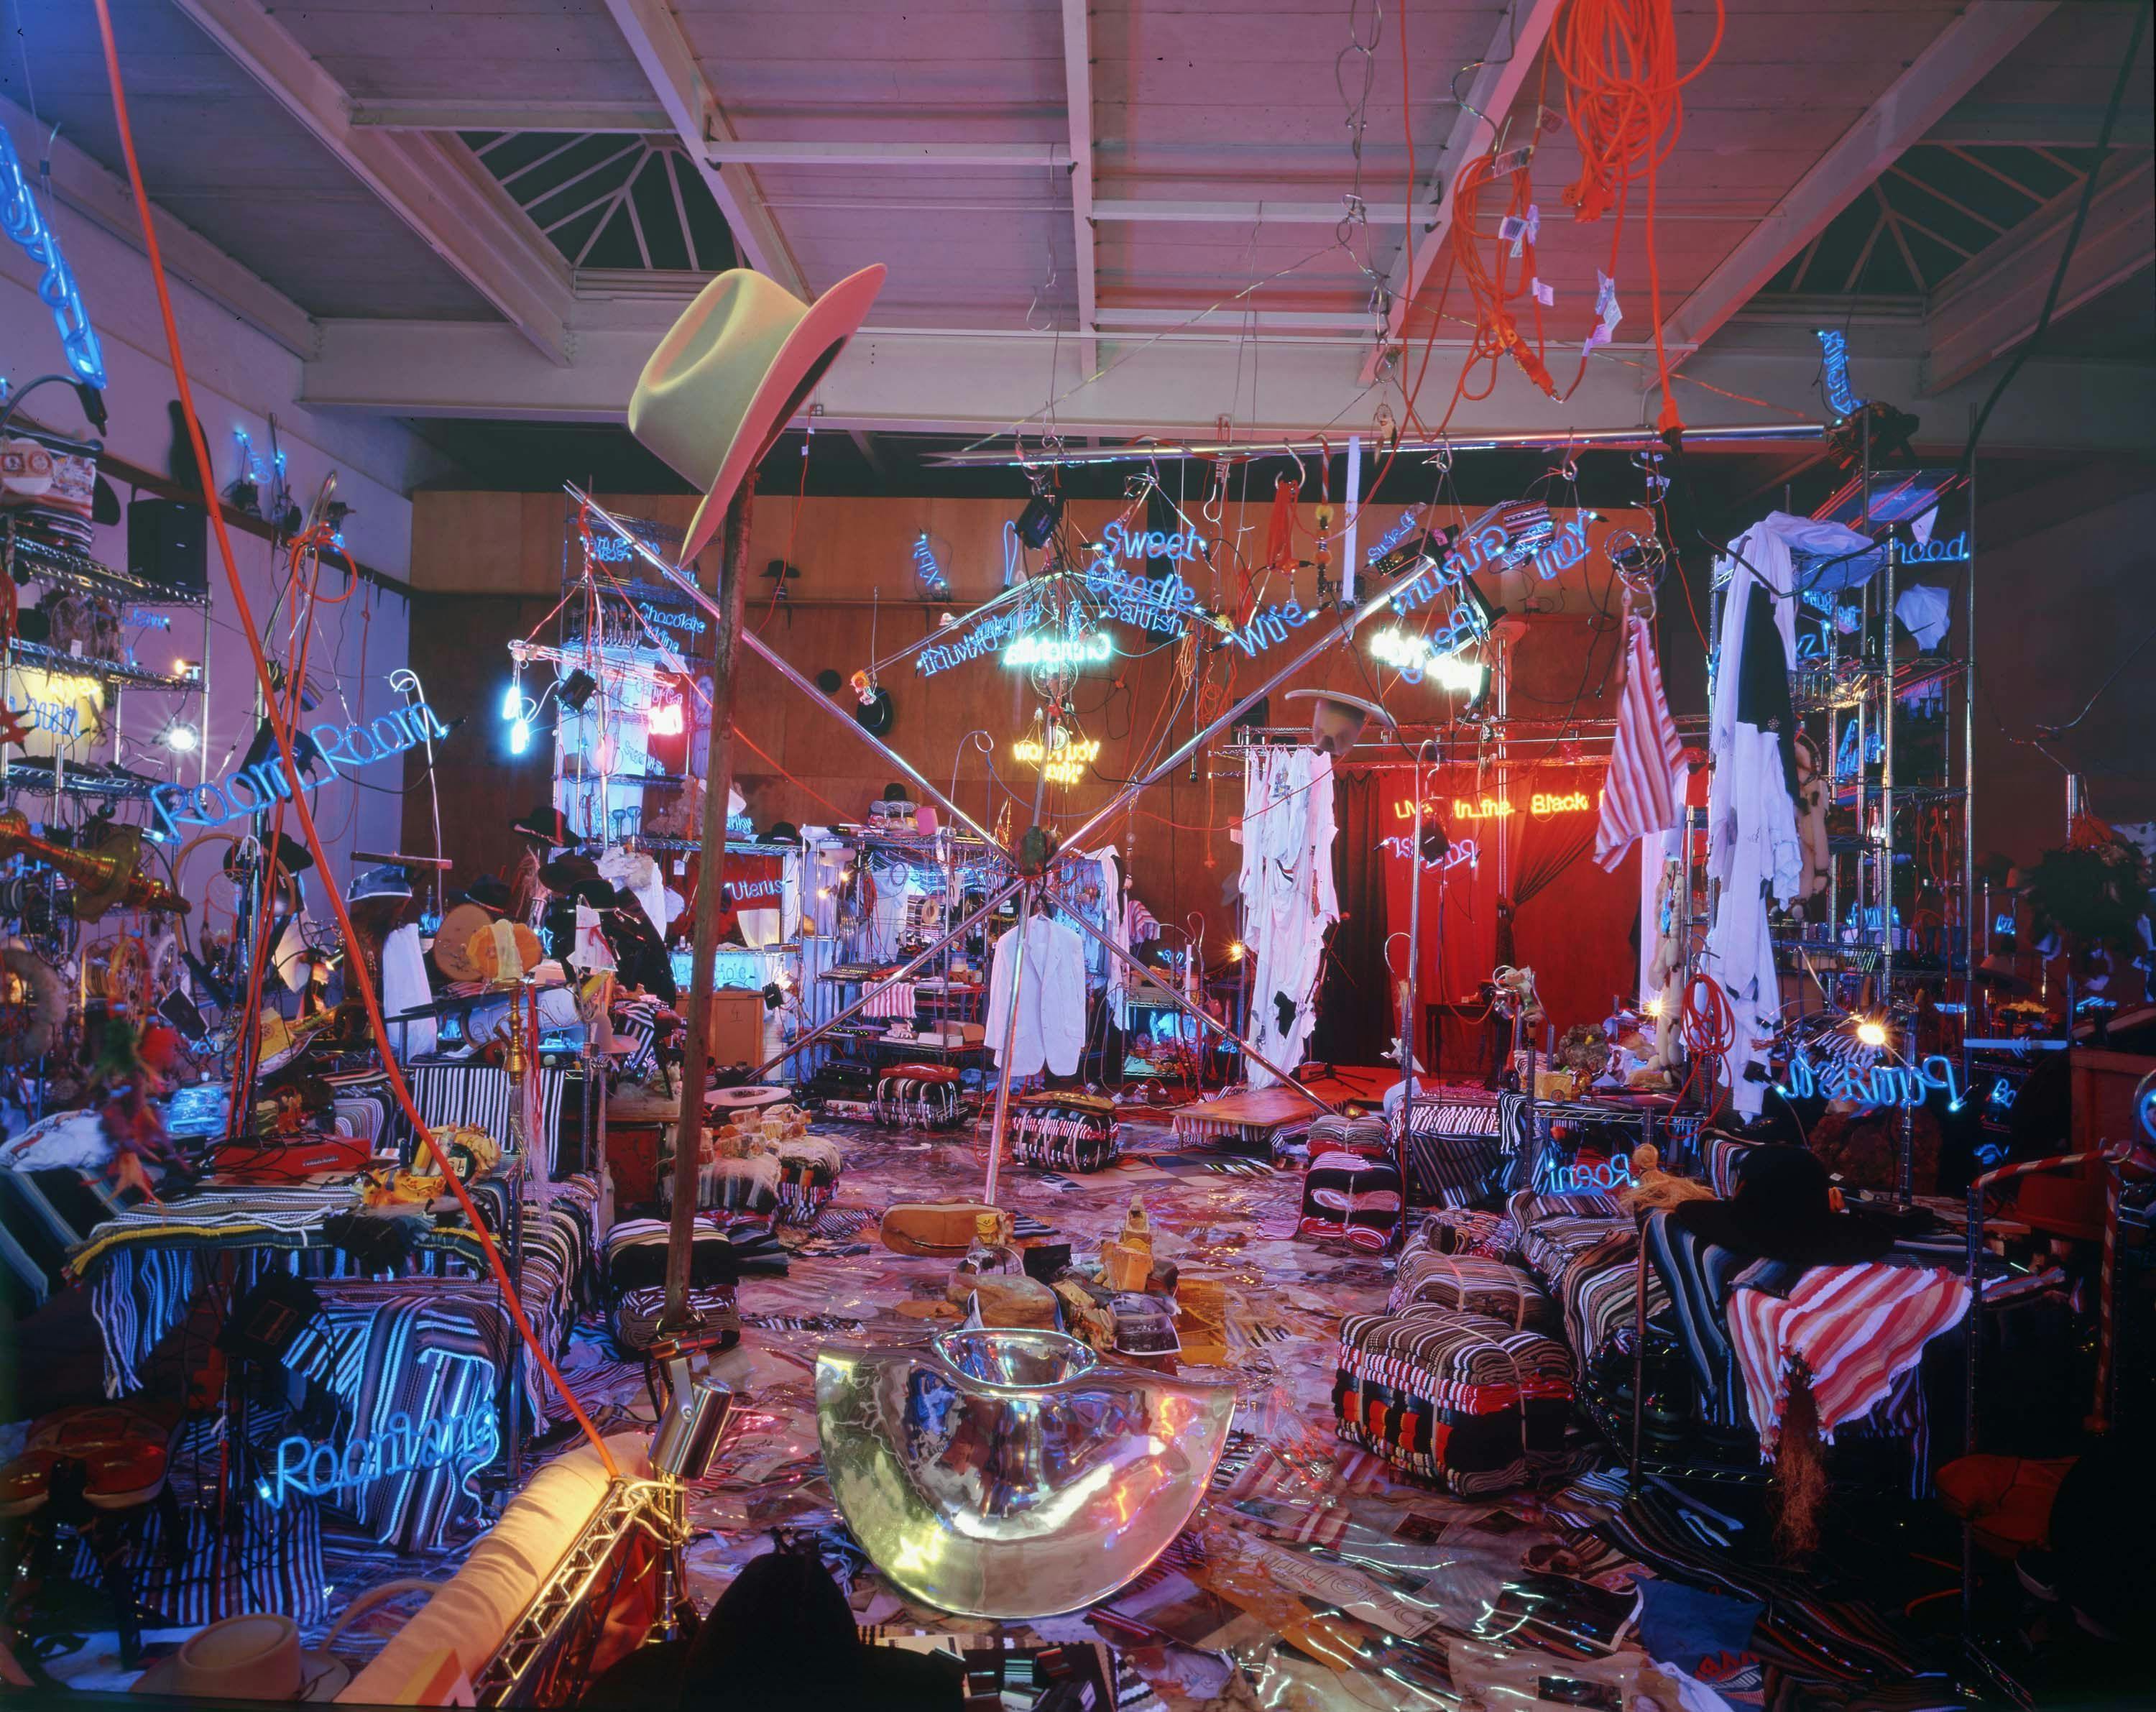 An installation view of the exhibition, Jason Rhoades: Black Pussy at David Zwirner in New York, dated 2007.